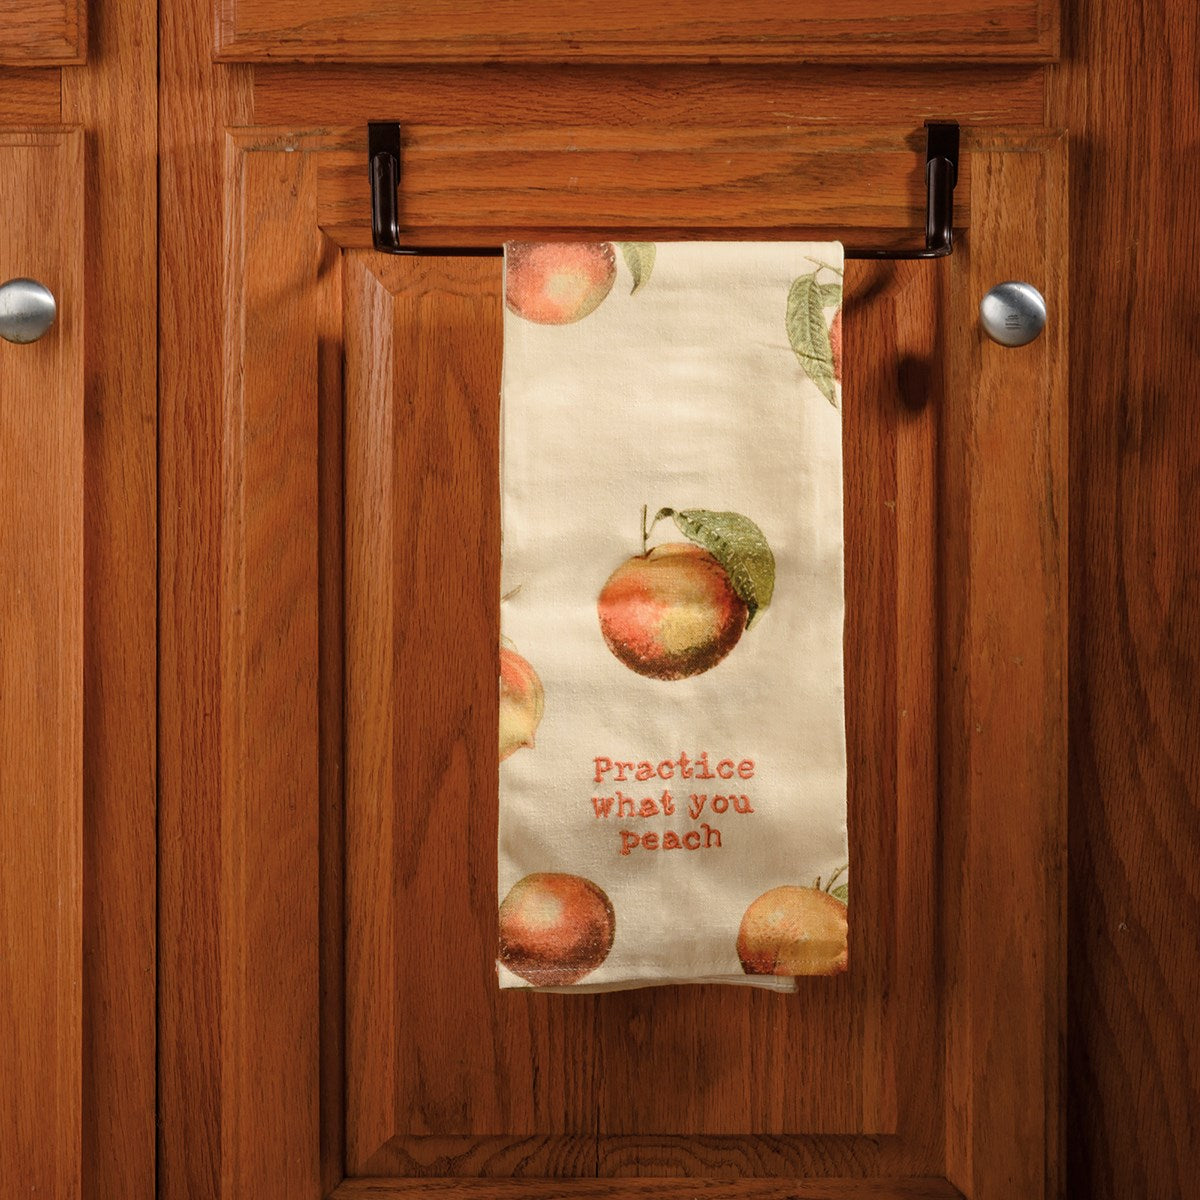 ivory towel with peach design hanging on a bar on kitchen cabinets.